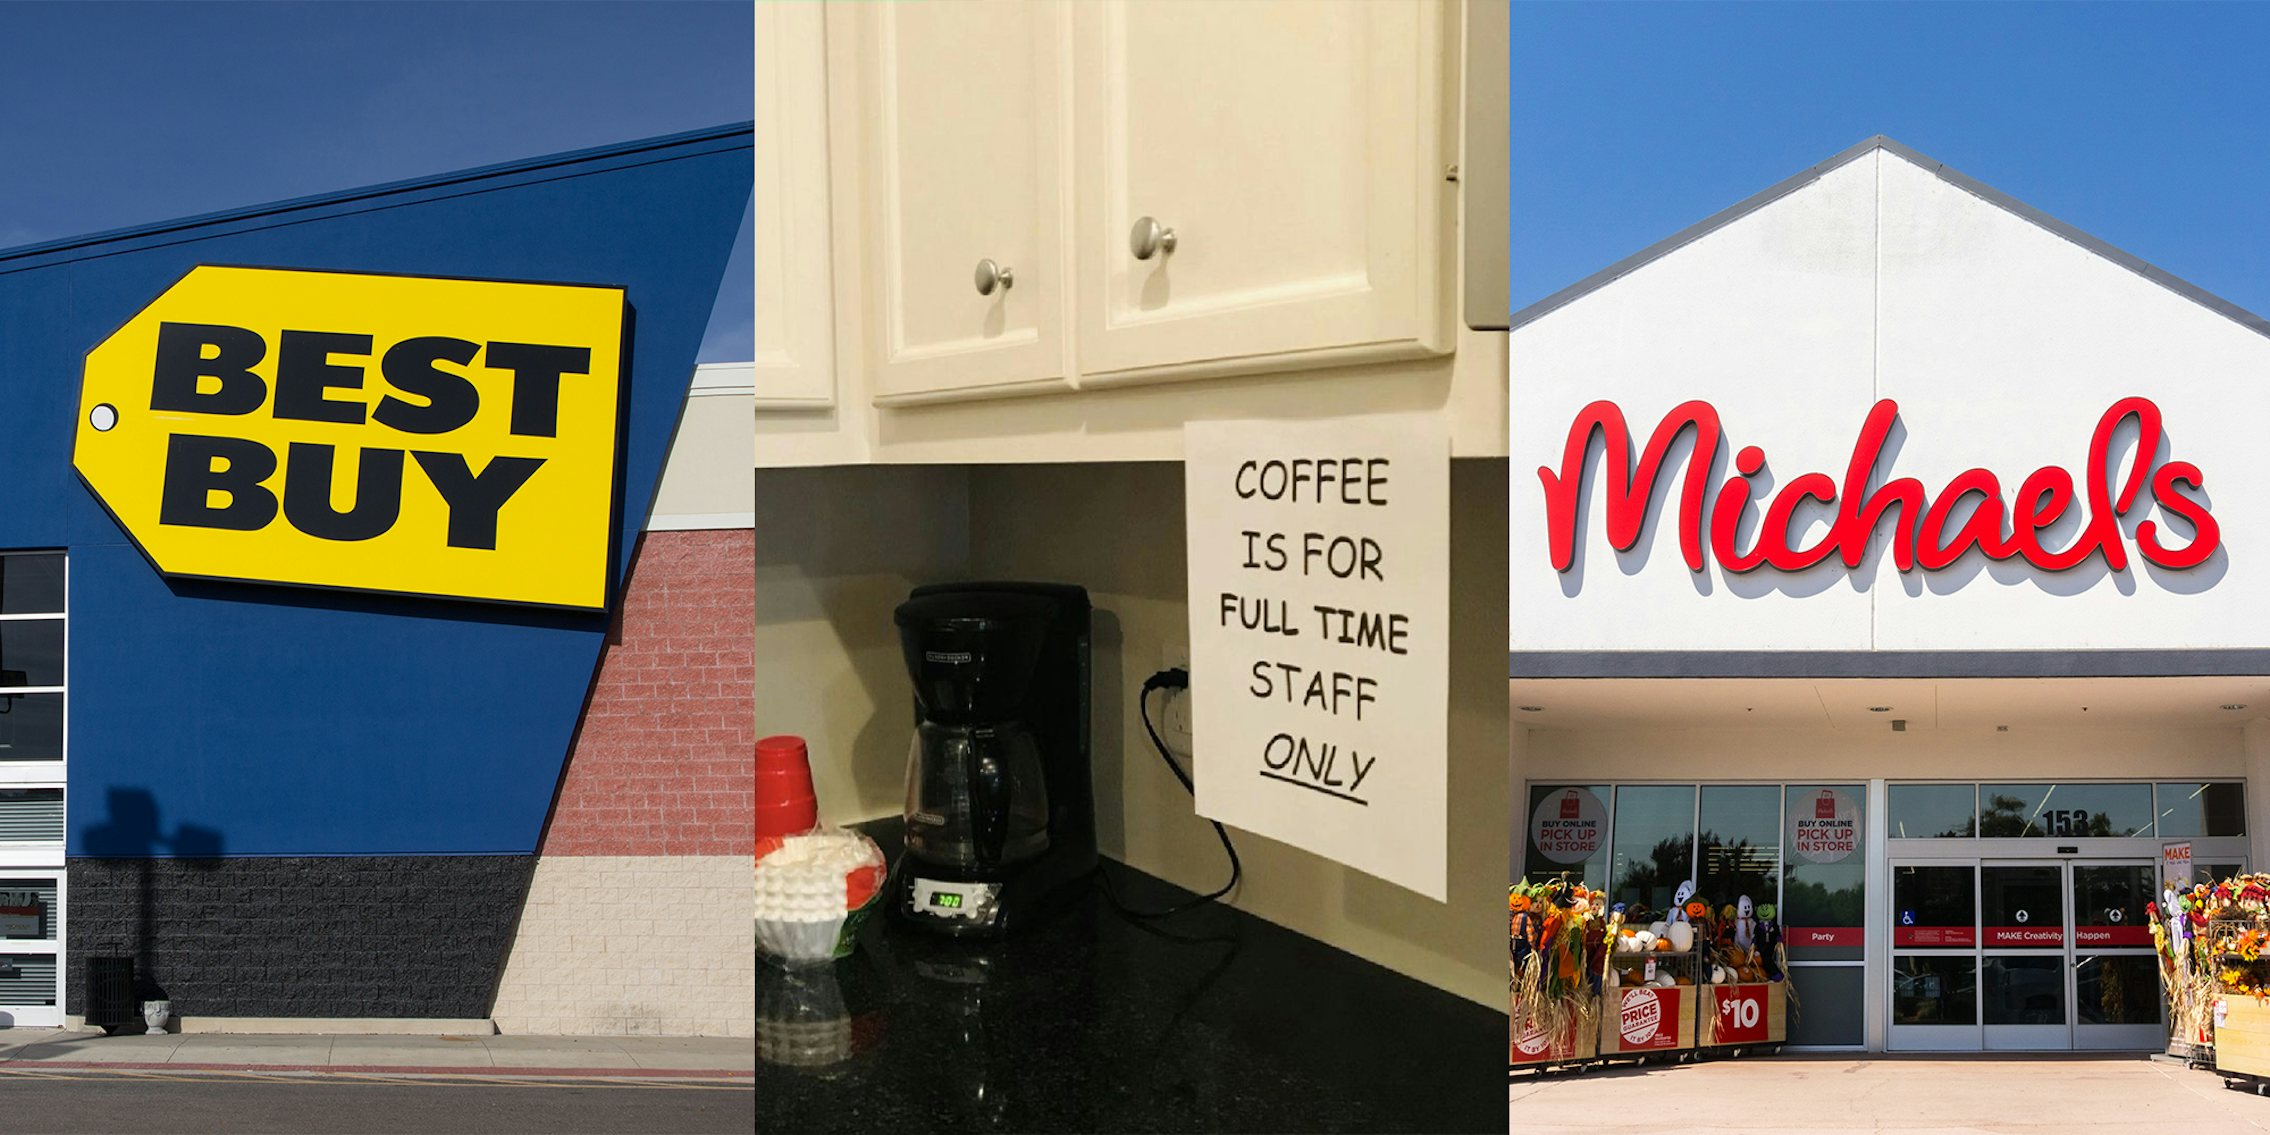 Worker posts 15 jaw-droppingly tone-deaf announcements from break room